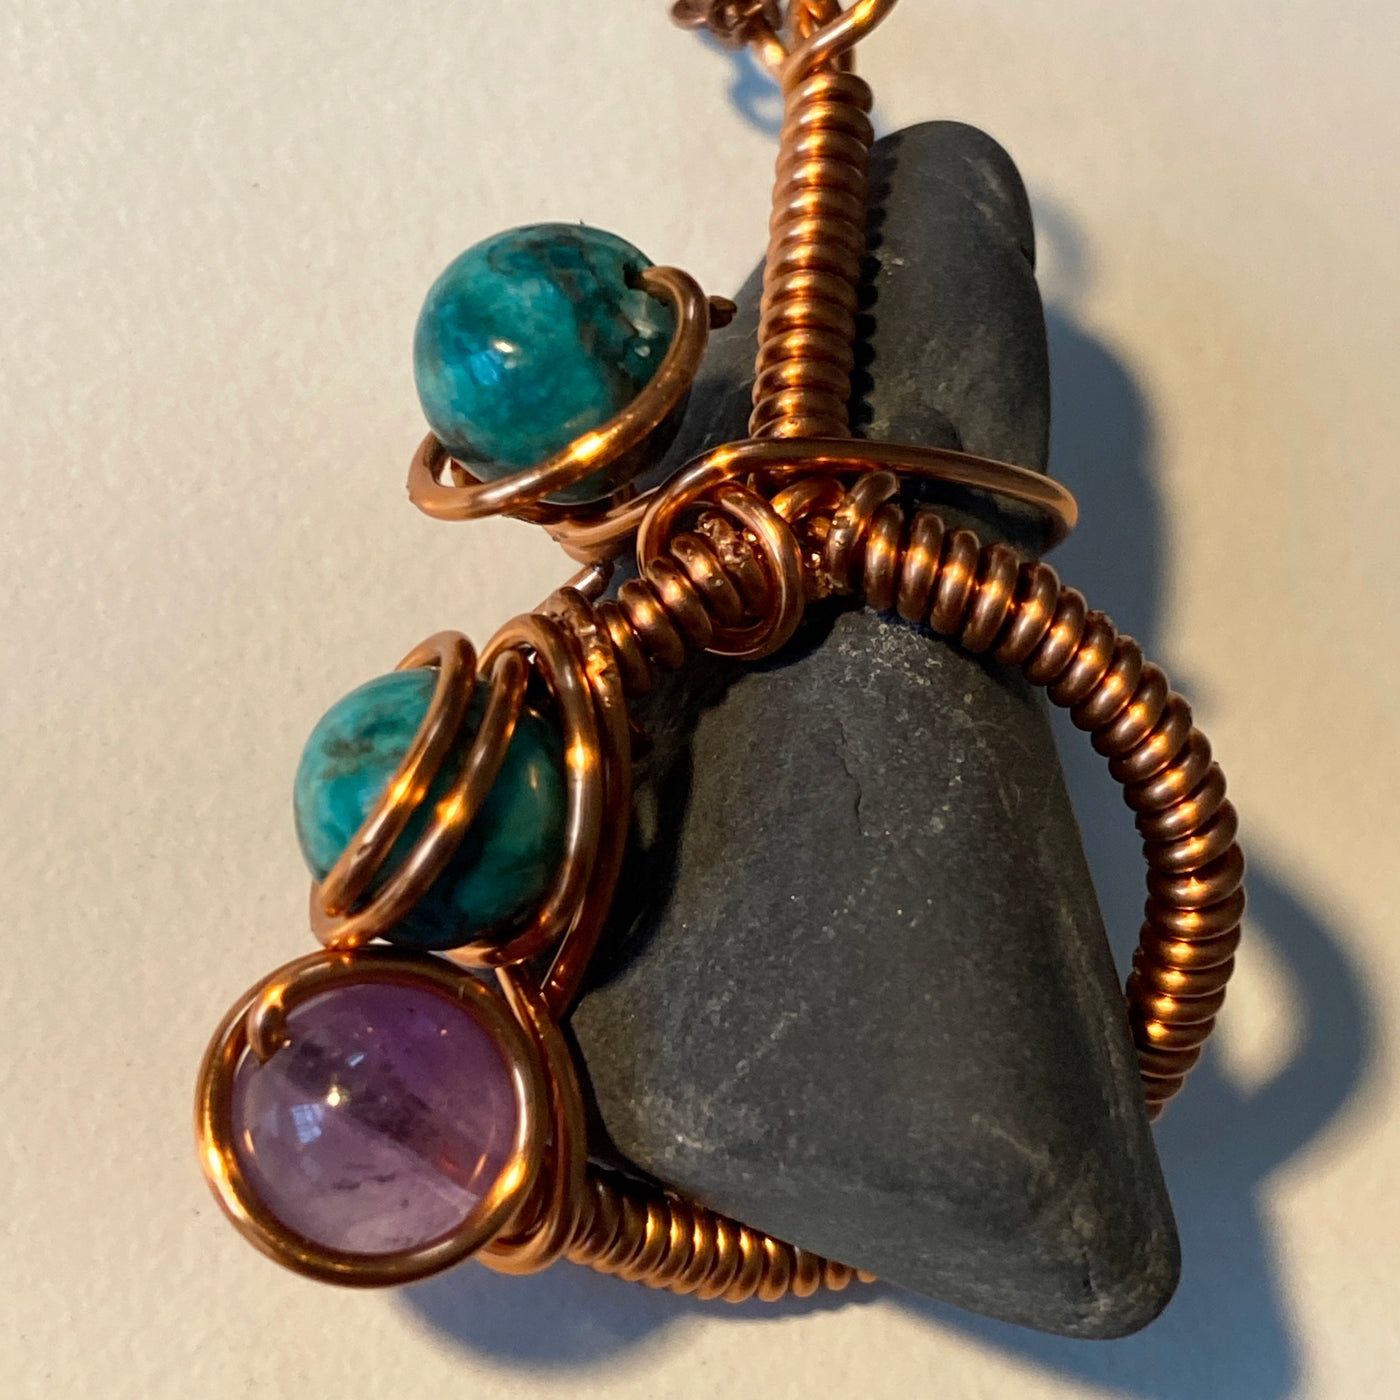 Black stone, turquoise, amethyst and wire